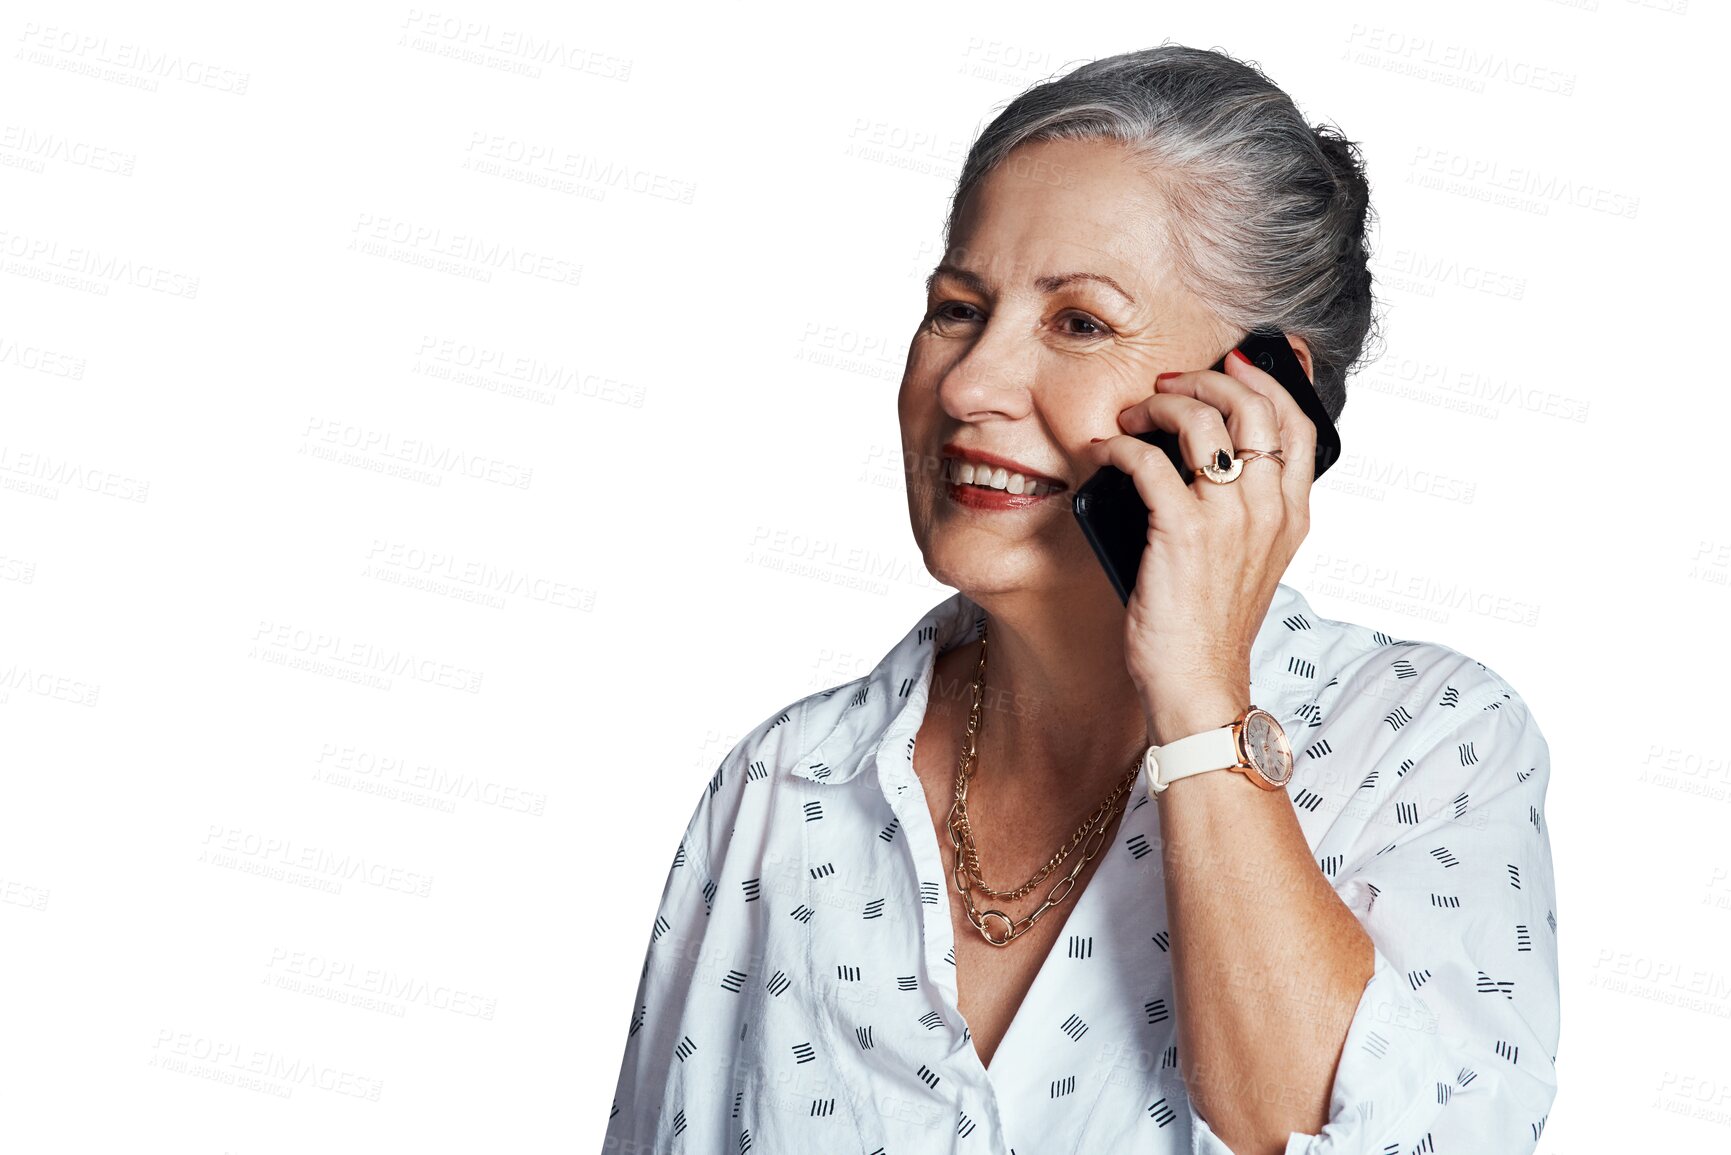 Buy stock photo Mature woman, phone call and smiling in conversation, talking and speaking on technology. Senior female person, online and connect in retirement, happy and isolated on transparent png background